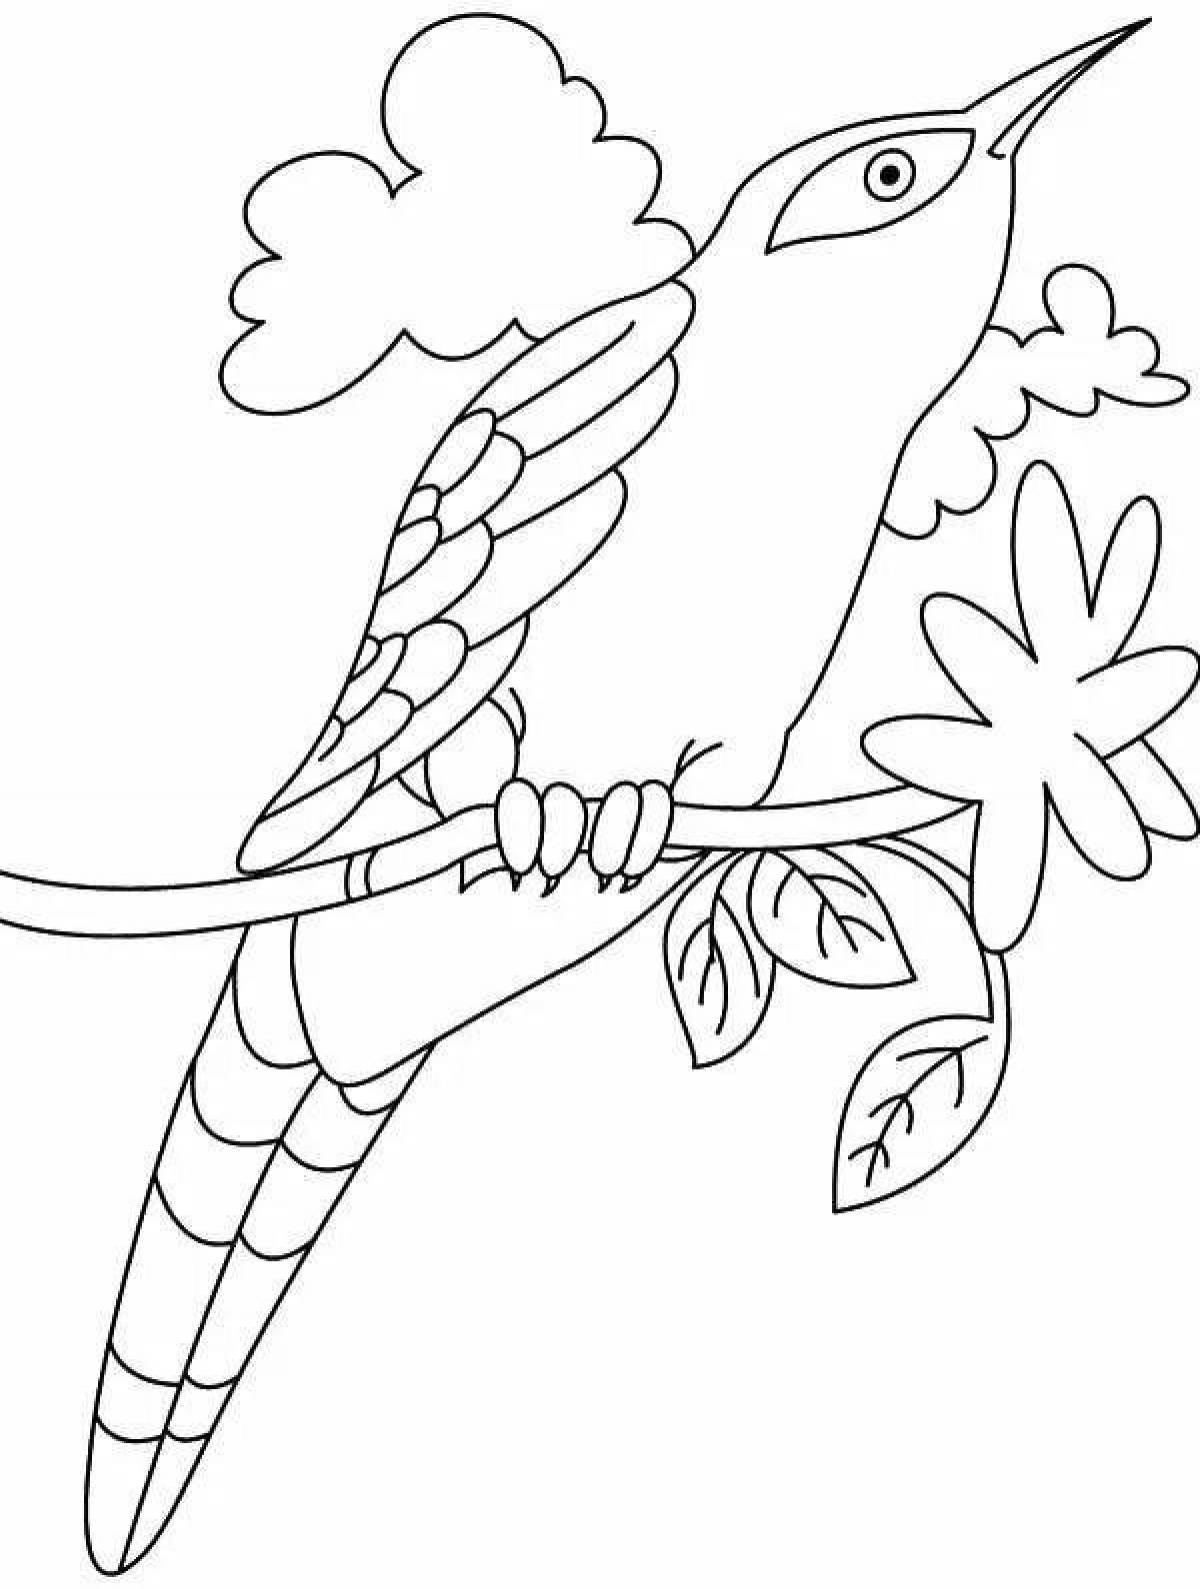 A fun cuckoo coloring book for the little ones